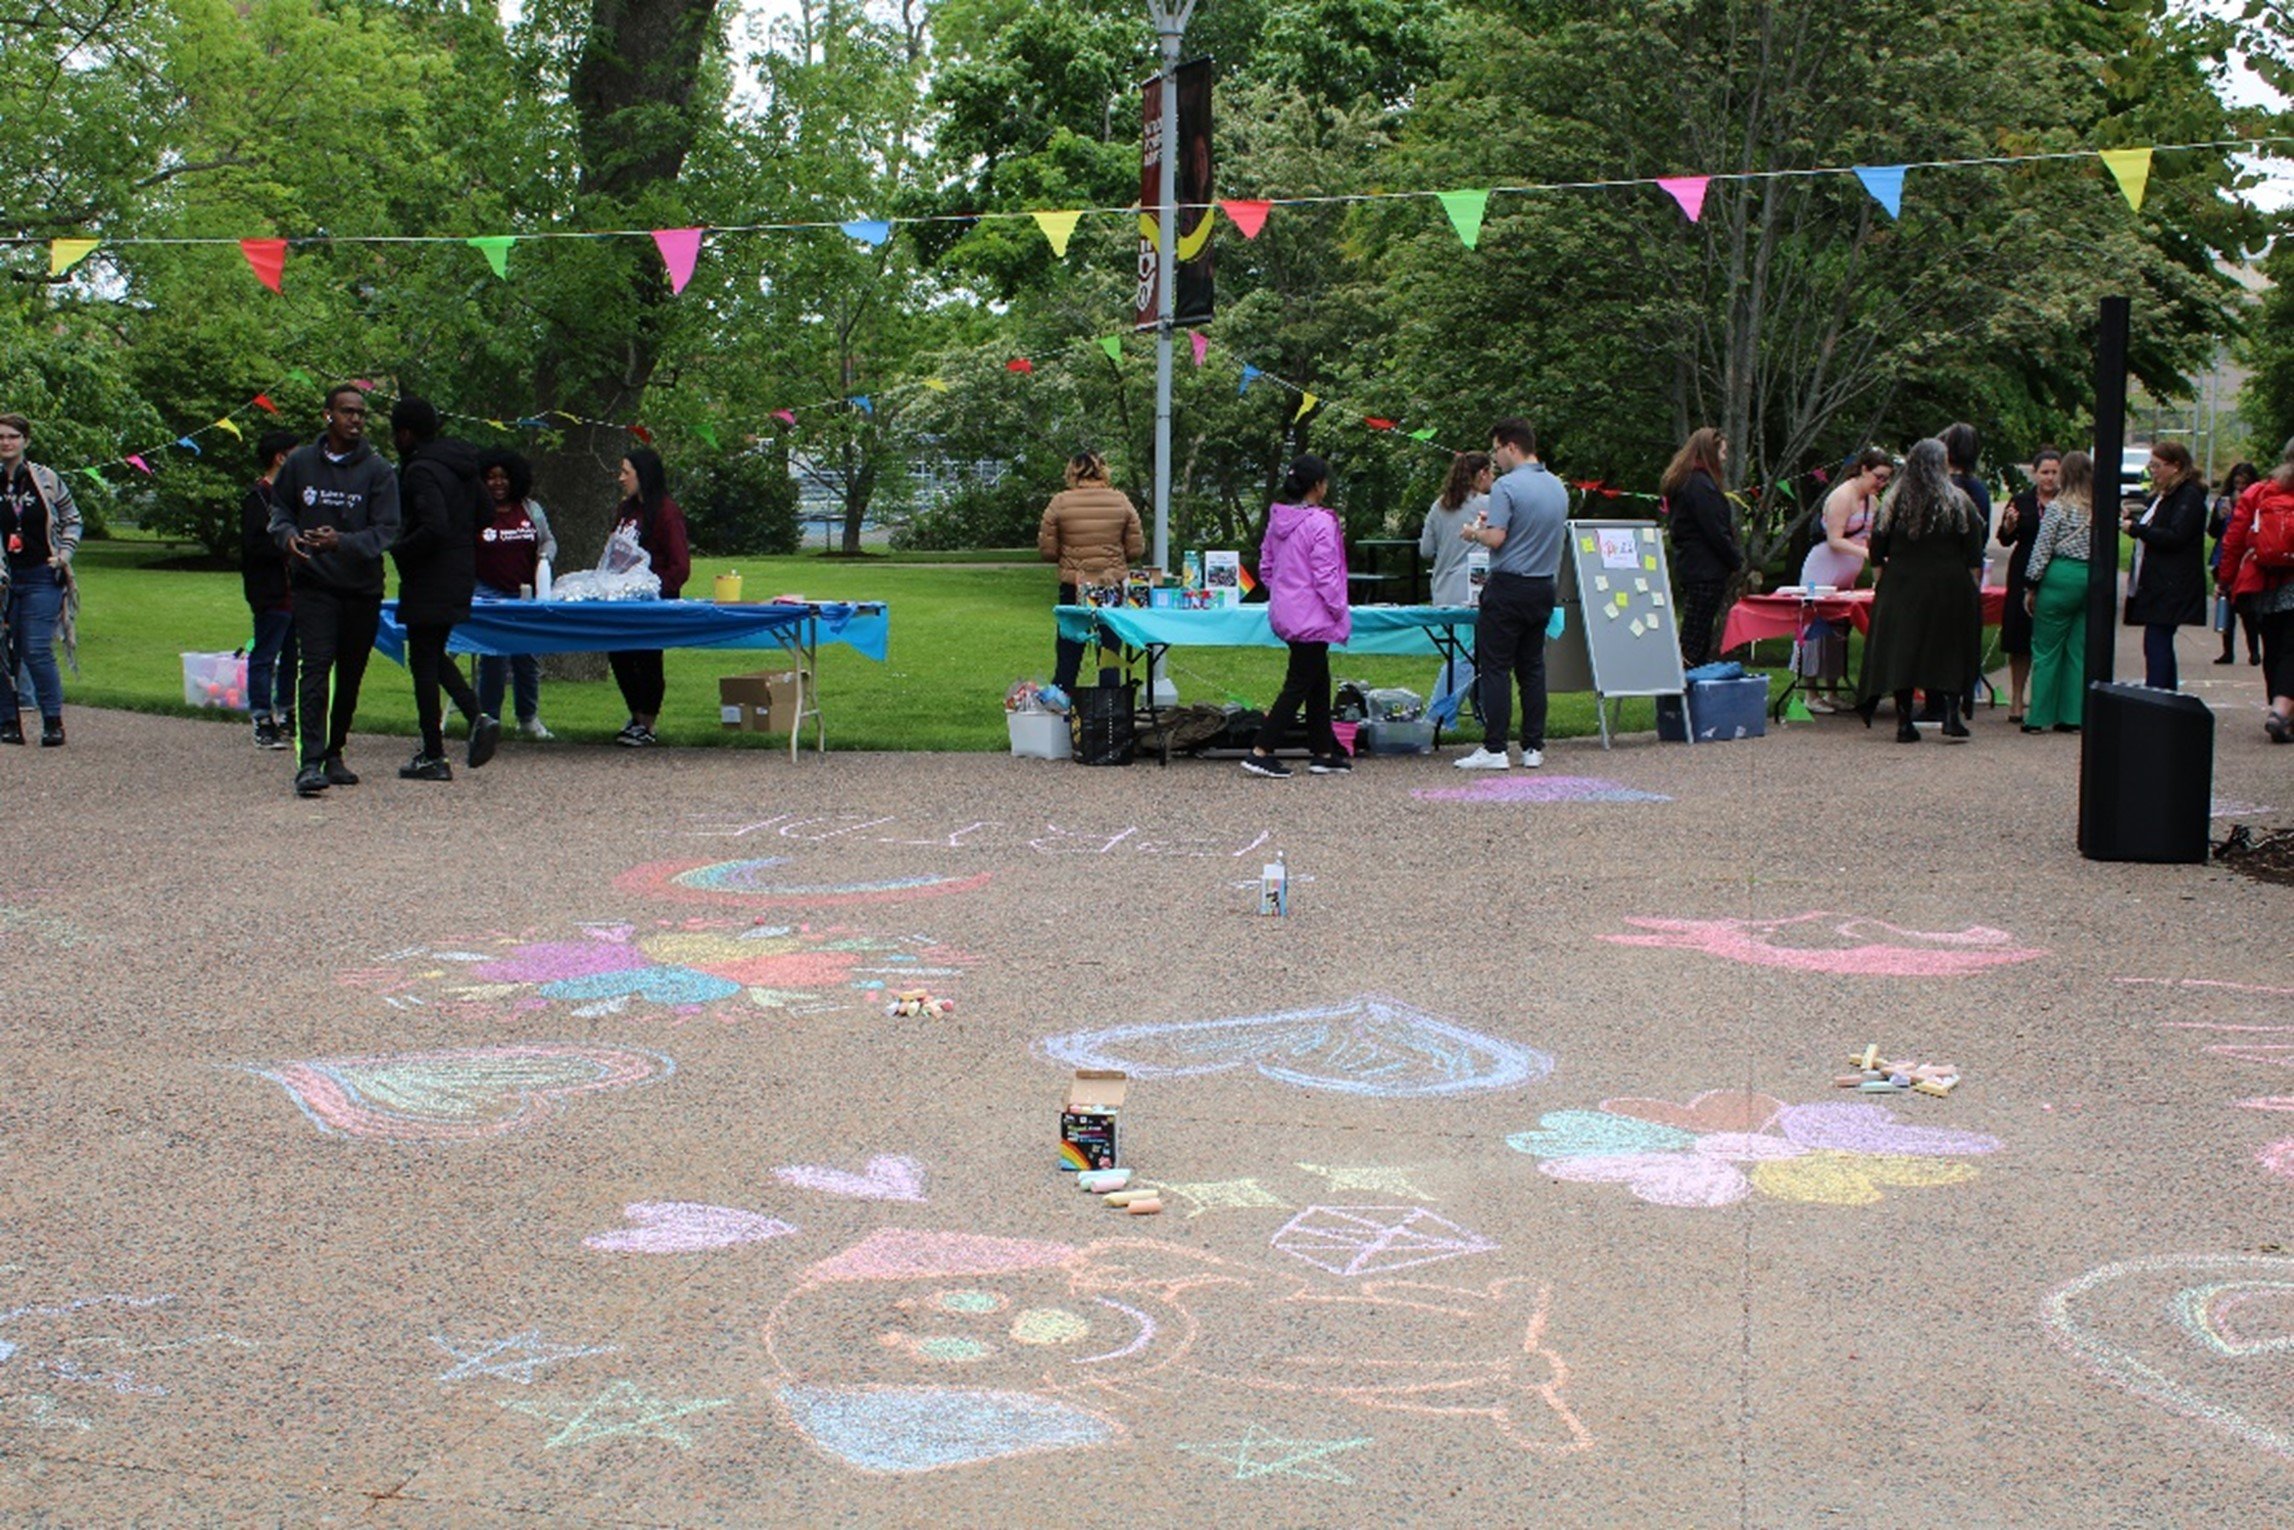  Saint Mary's Quad featuring several Pride activity tables along edge of grass and colorful chalk drawings on cobblestone path.   